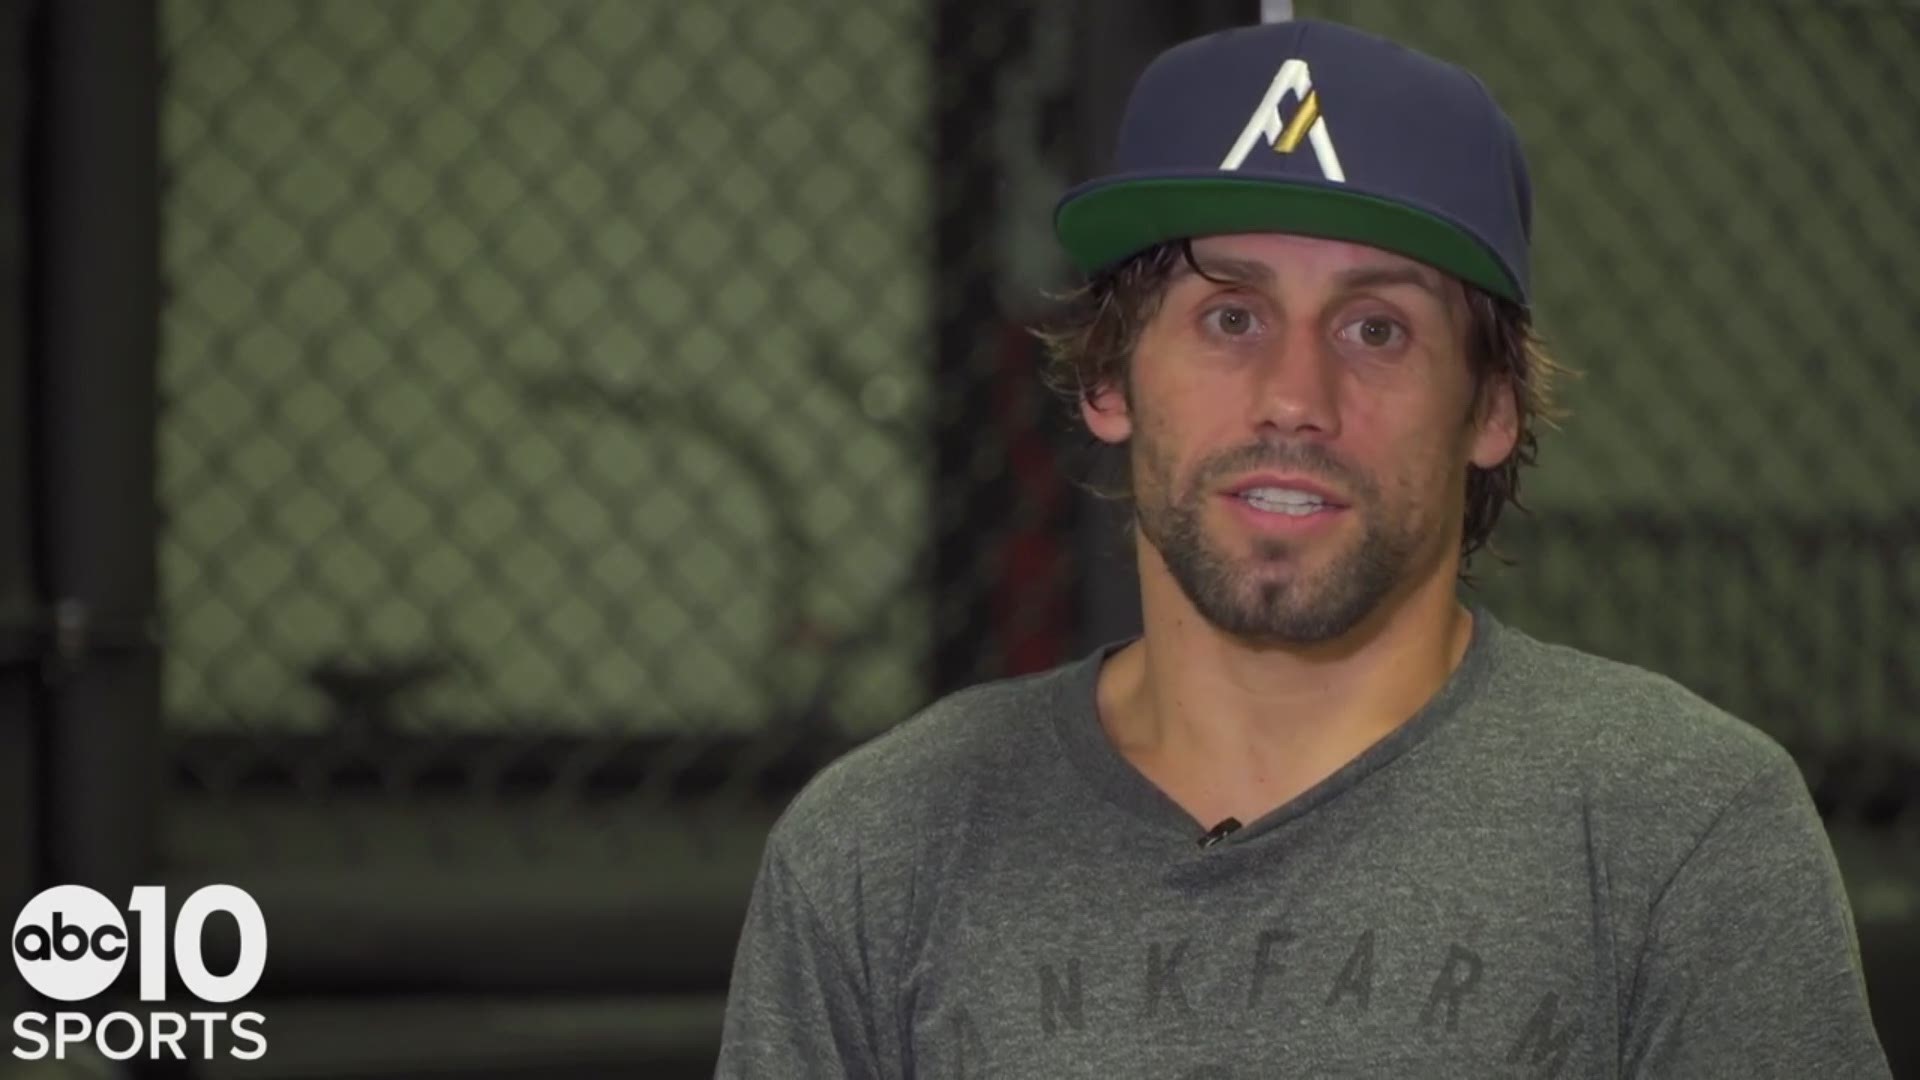 UFC bantamweight Hall-of-Famer Urijah Faber talks to ABC10's Sean Cunningham about his decision to end his retirement to fight in his hometown of Sacramento on July 11th at Golden 1 Center, how long he'll continue to fight, catching the eye of champion Henry Cejudo and a possible match against former teammate T.J. Dillashaw.